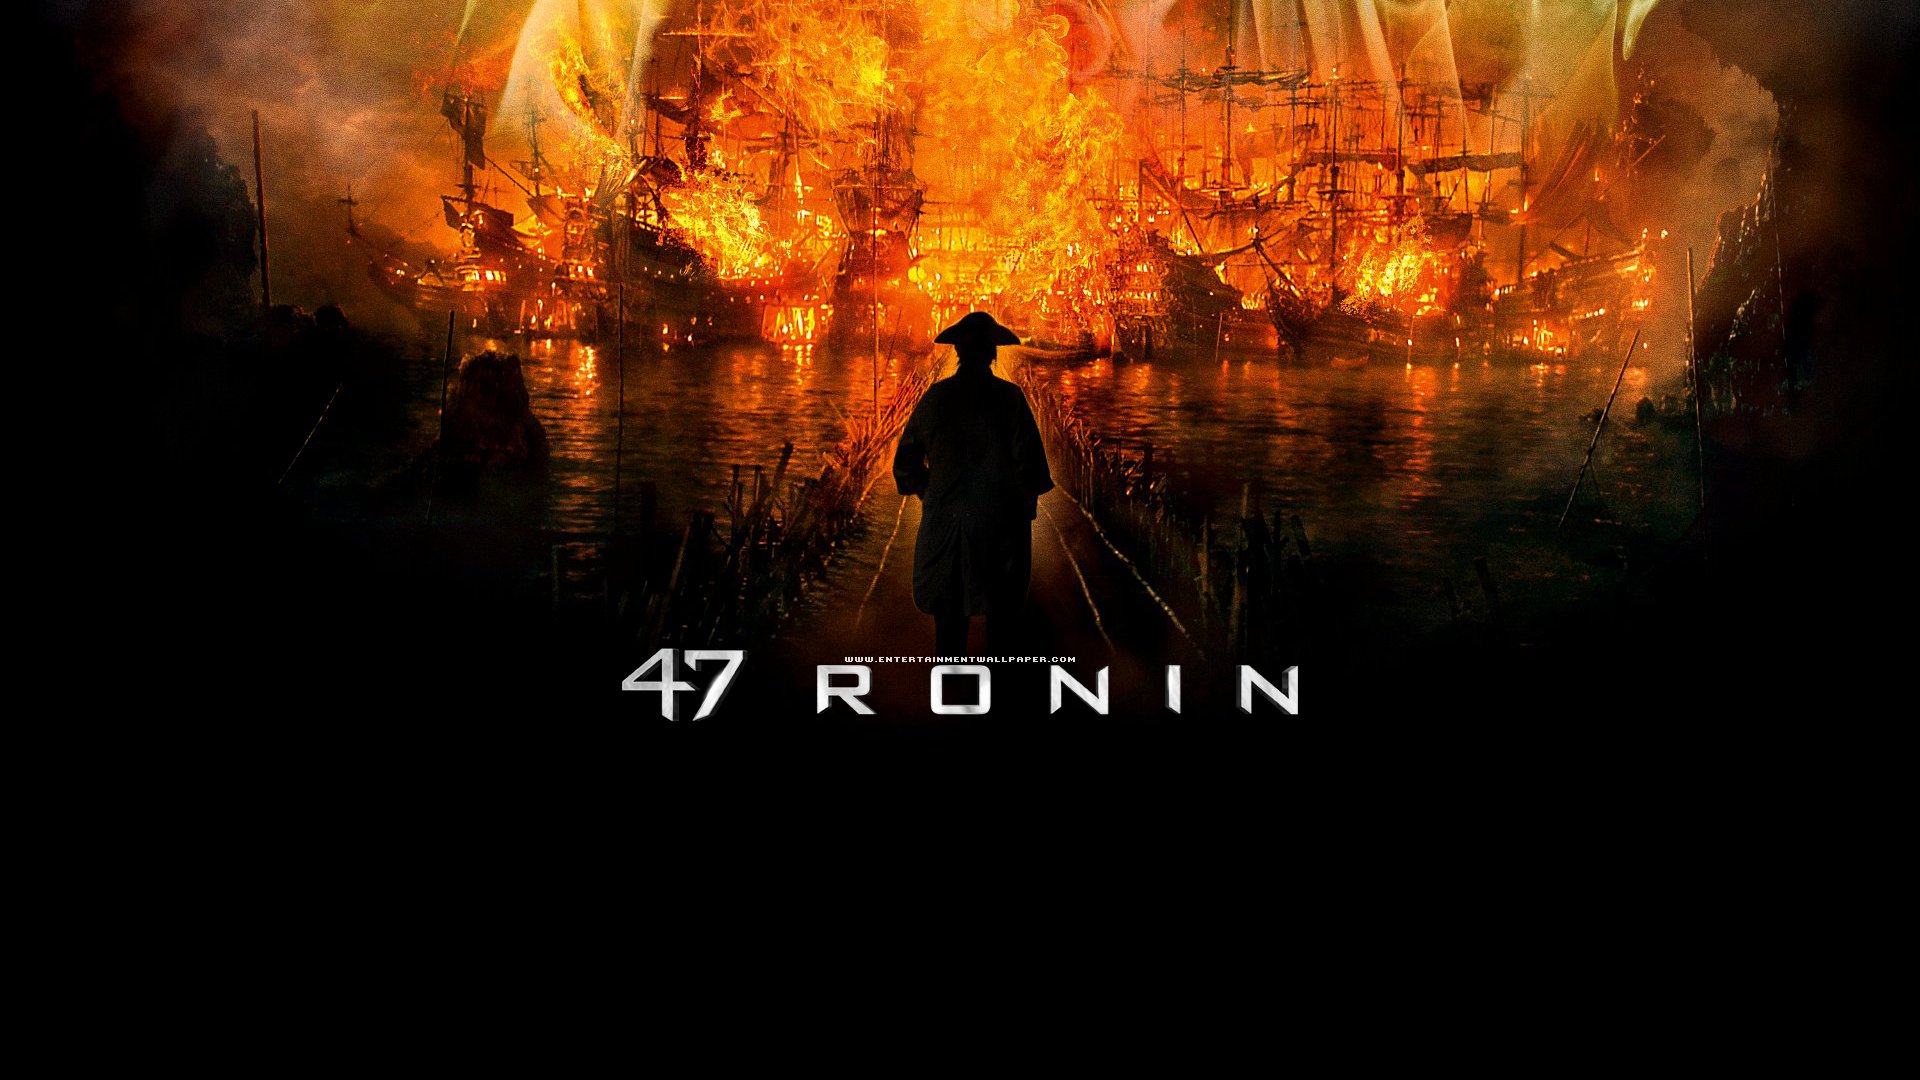 Ronin HD New Awesome High Definition Wallpaper